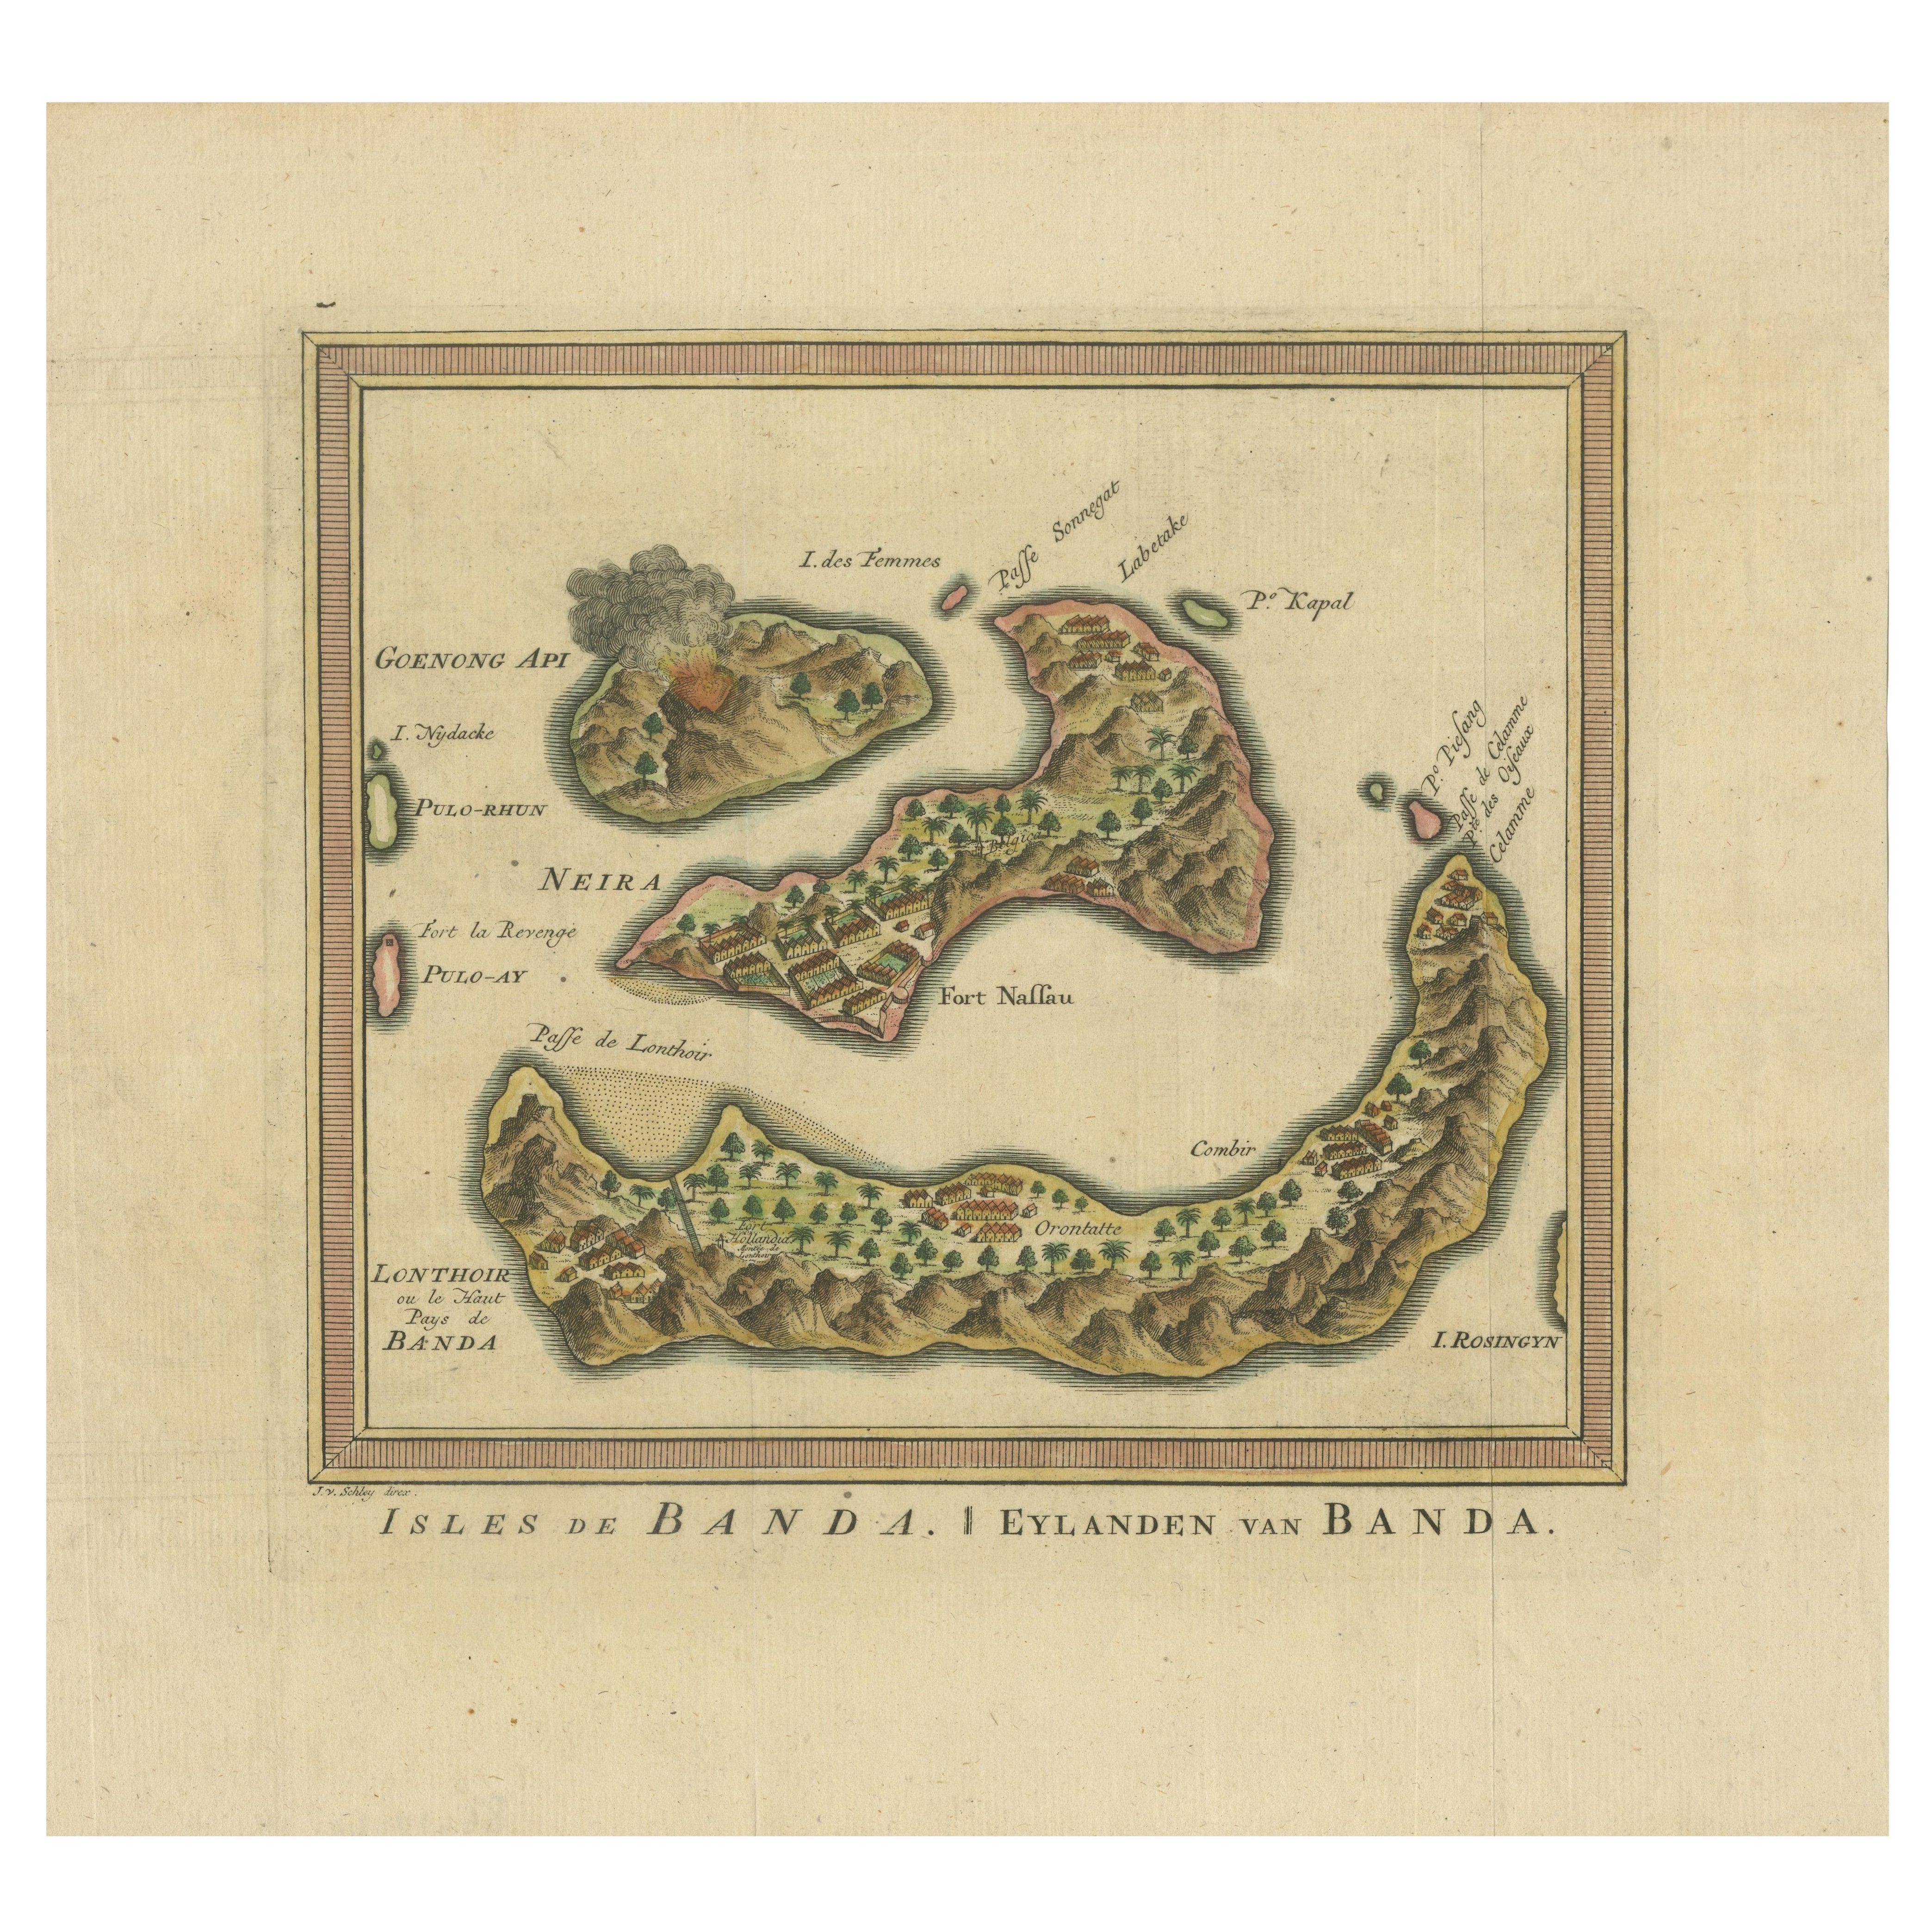 Spice Epicenter: Engraving of The Banda Islands in the Age of Exploration, 1753